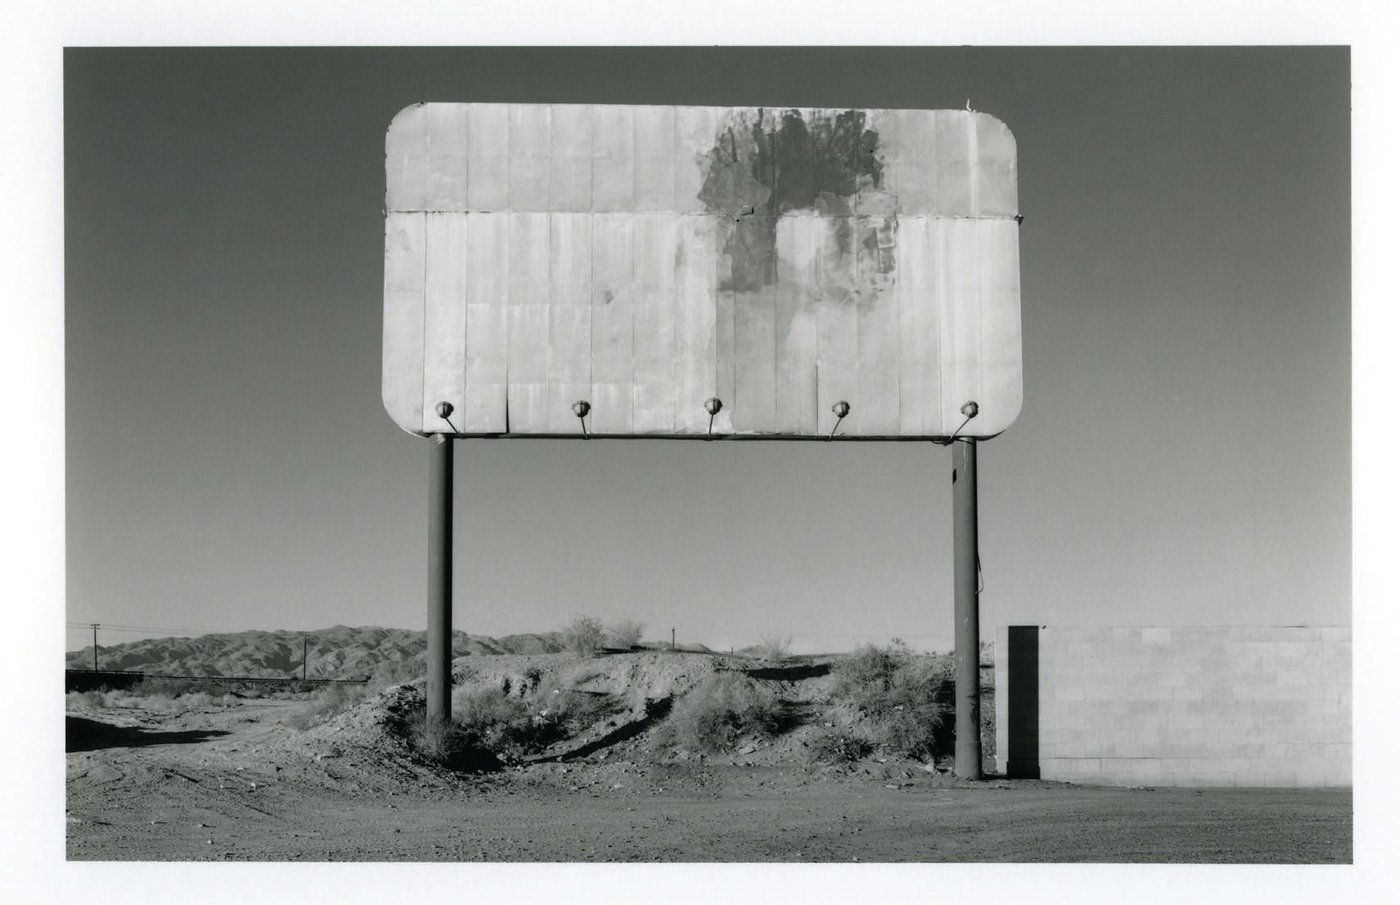 David Pace’s “Route 66” (1989, photography), 21 inches by 14 inches PHOTO COURTESY OF ICA/SAN JOSE/ COLLECTION OF DIANE JONTE-PACE